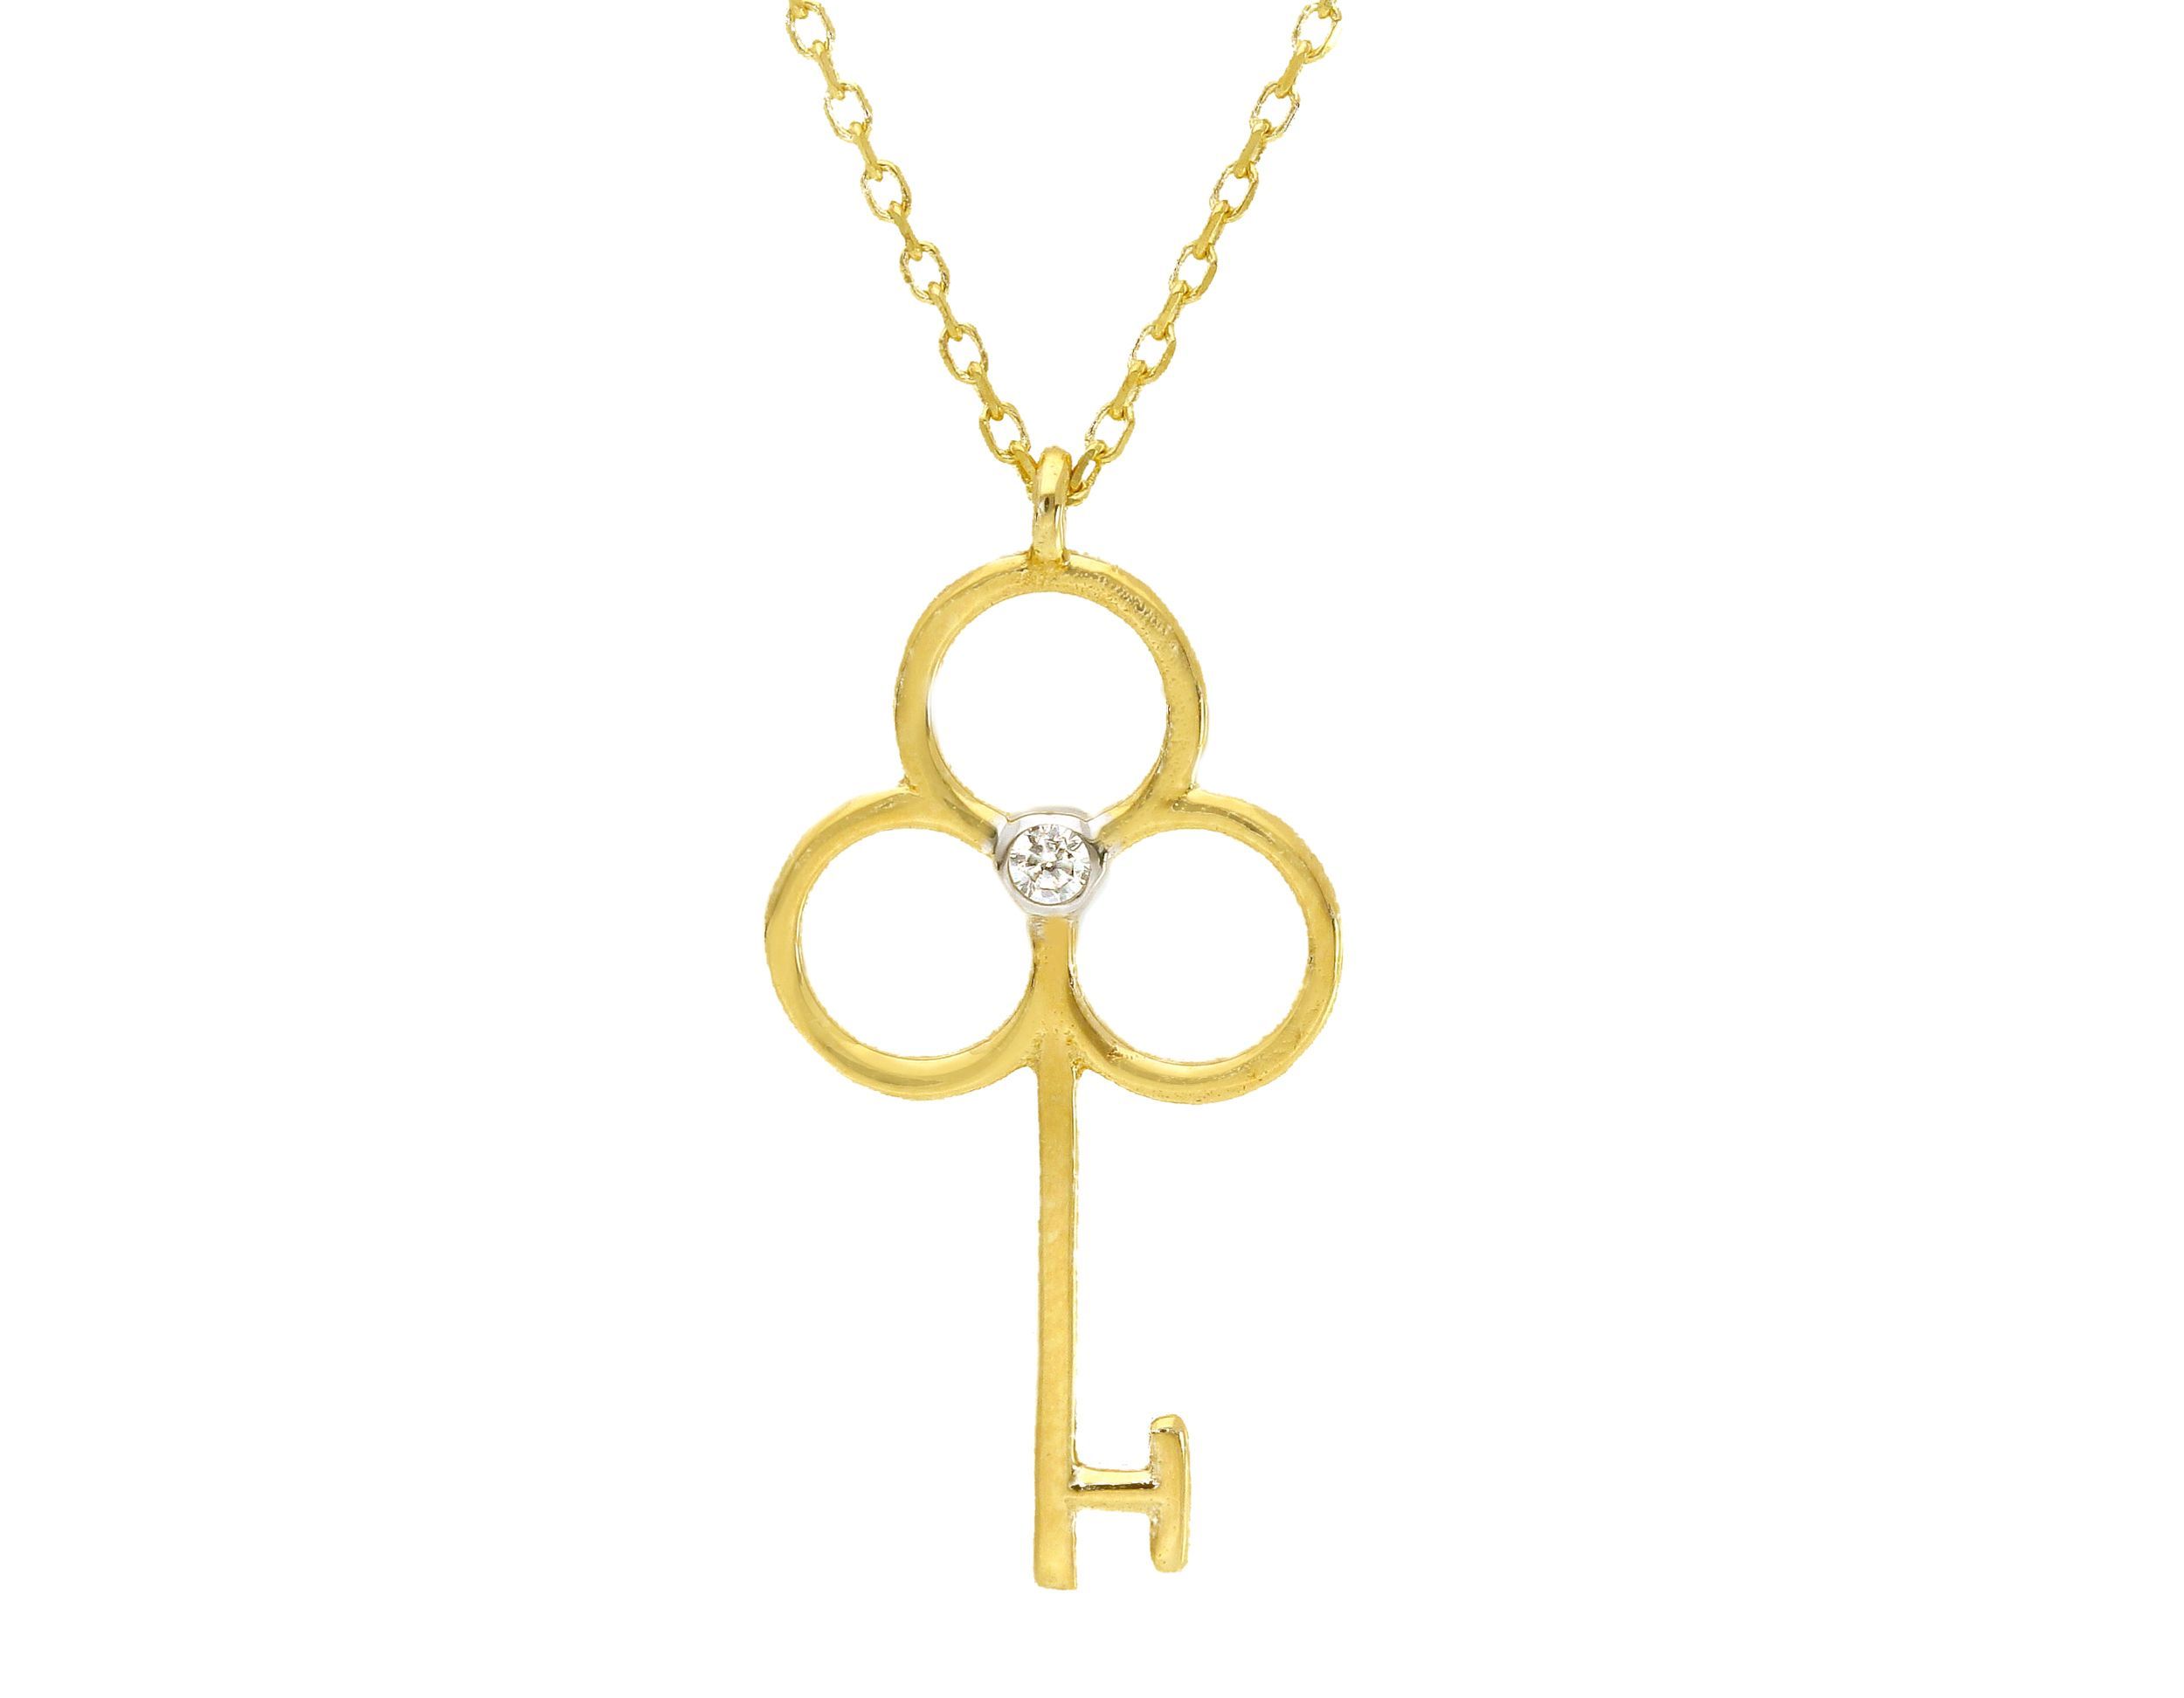 Golden key necklace with white zircon (code S258665)